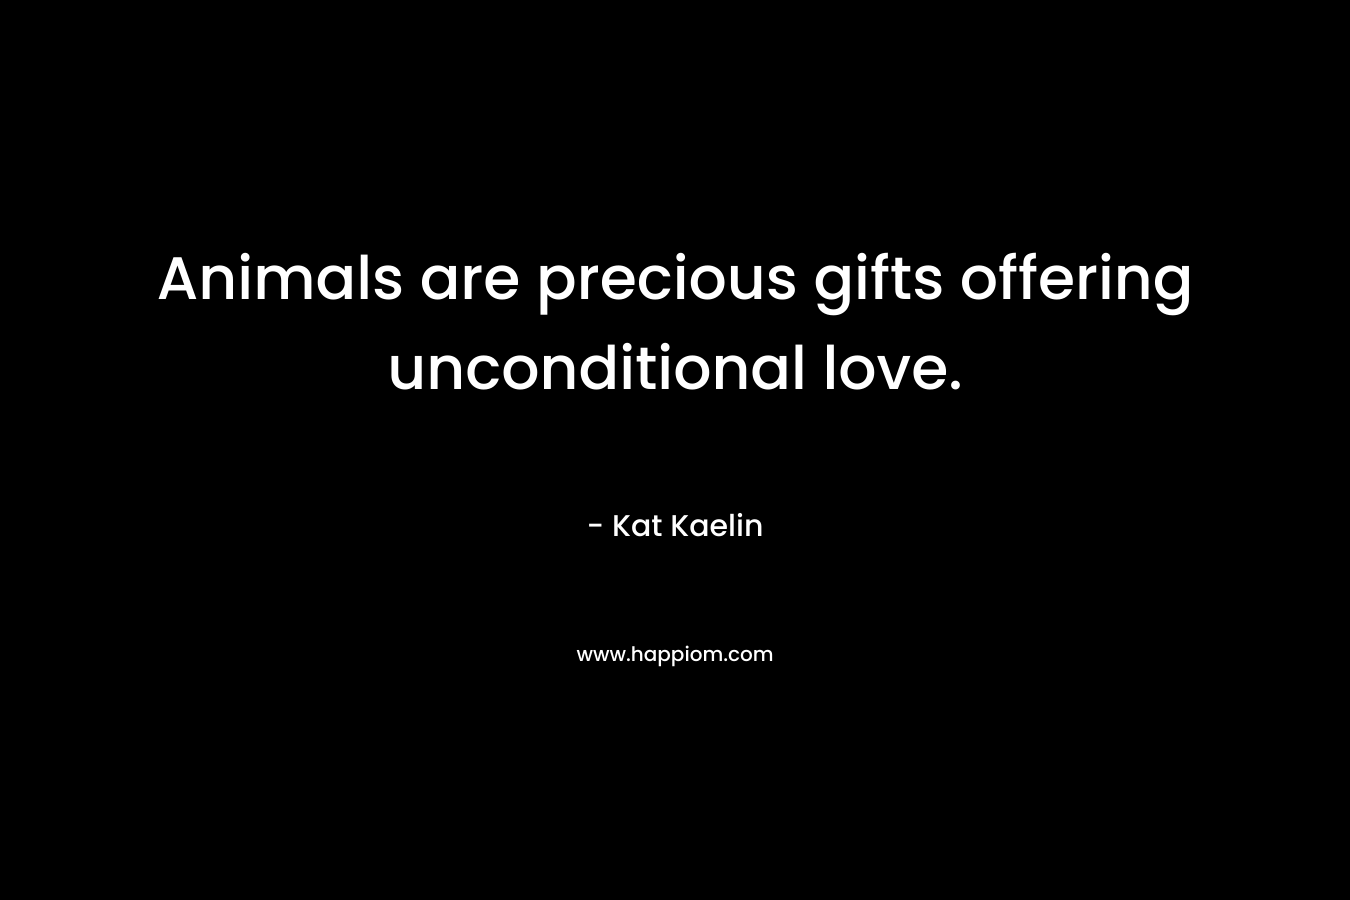 Animals are precious gifts offering unconditional love.